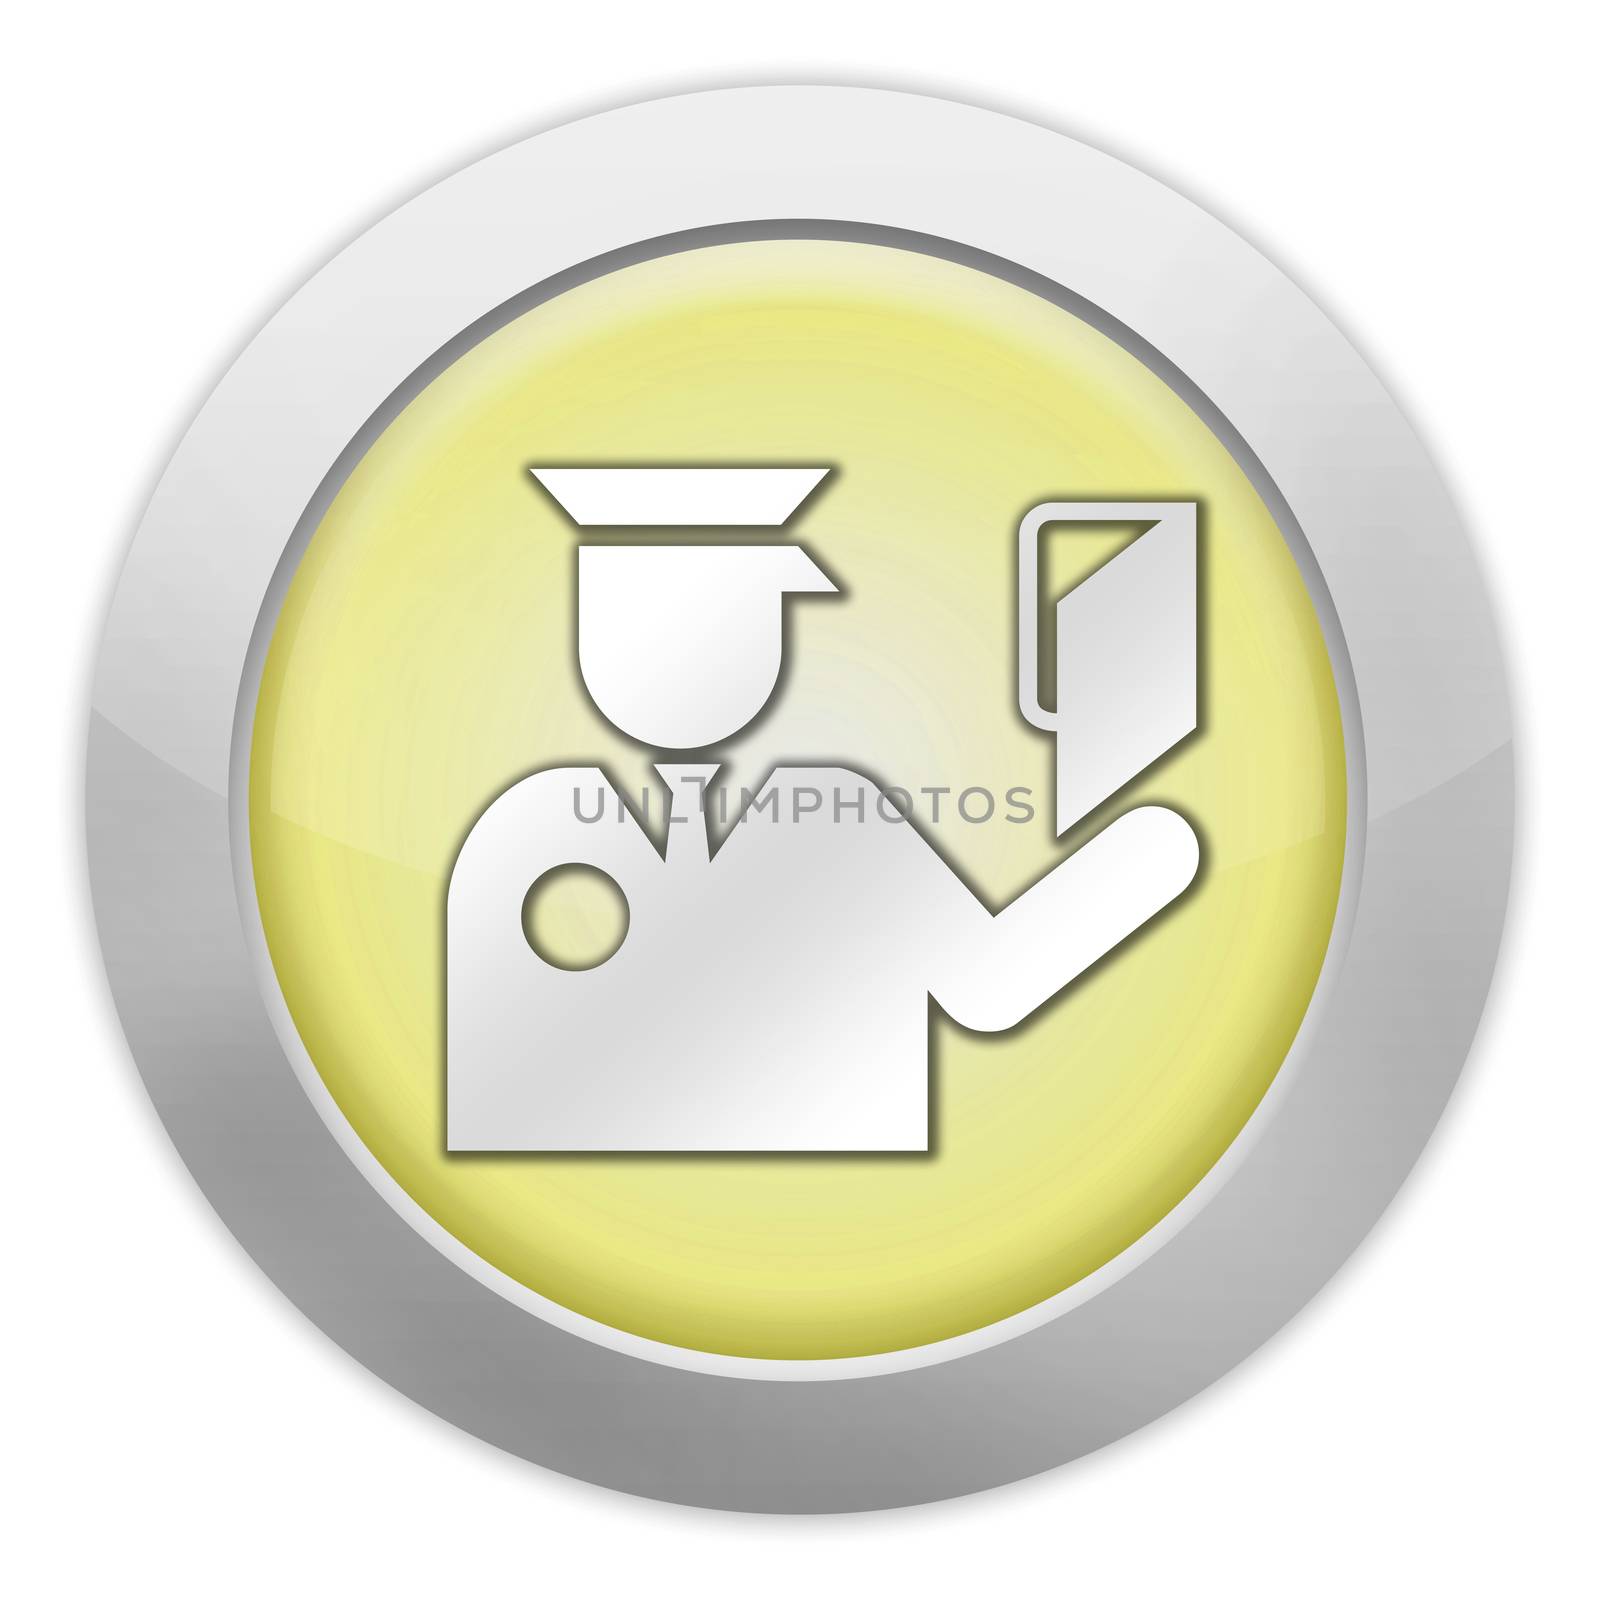 Icon, Button, Pictogram with Immigration symbol